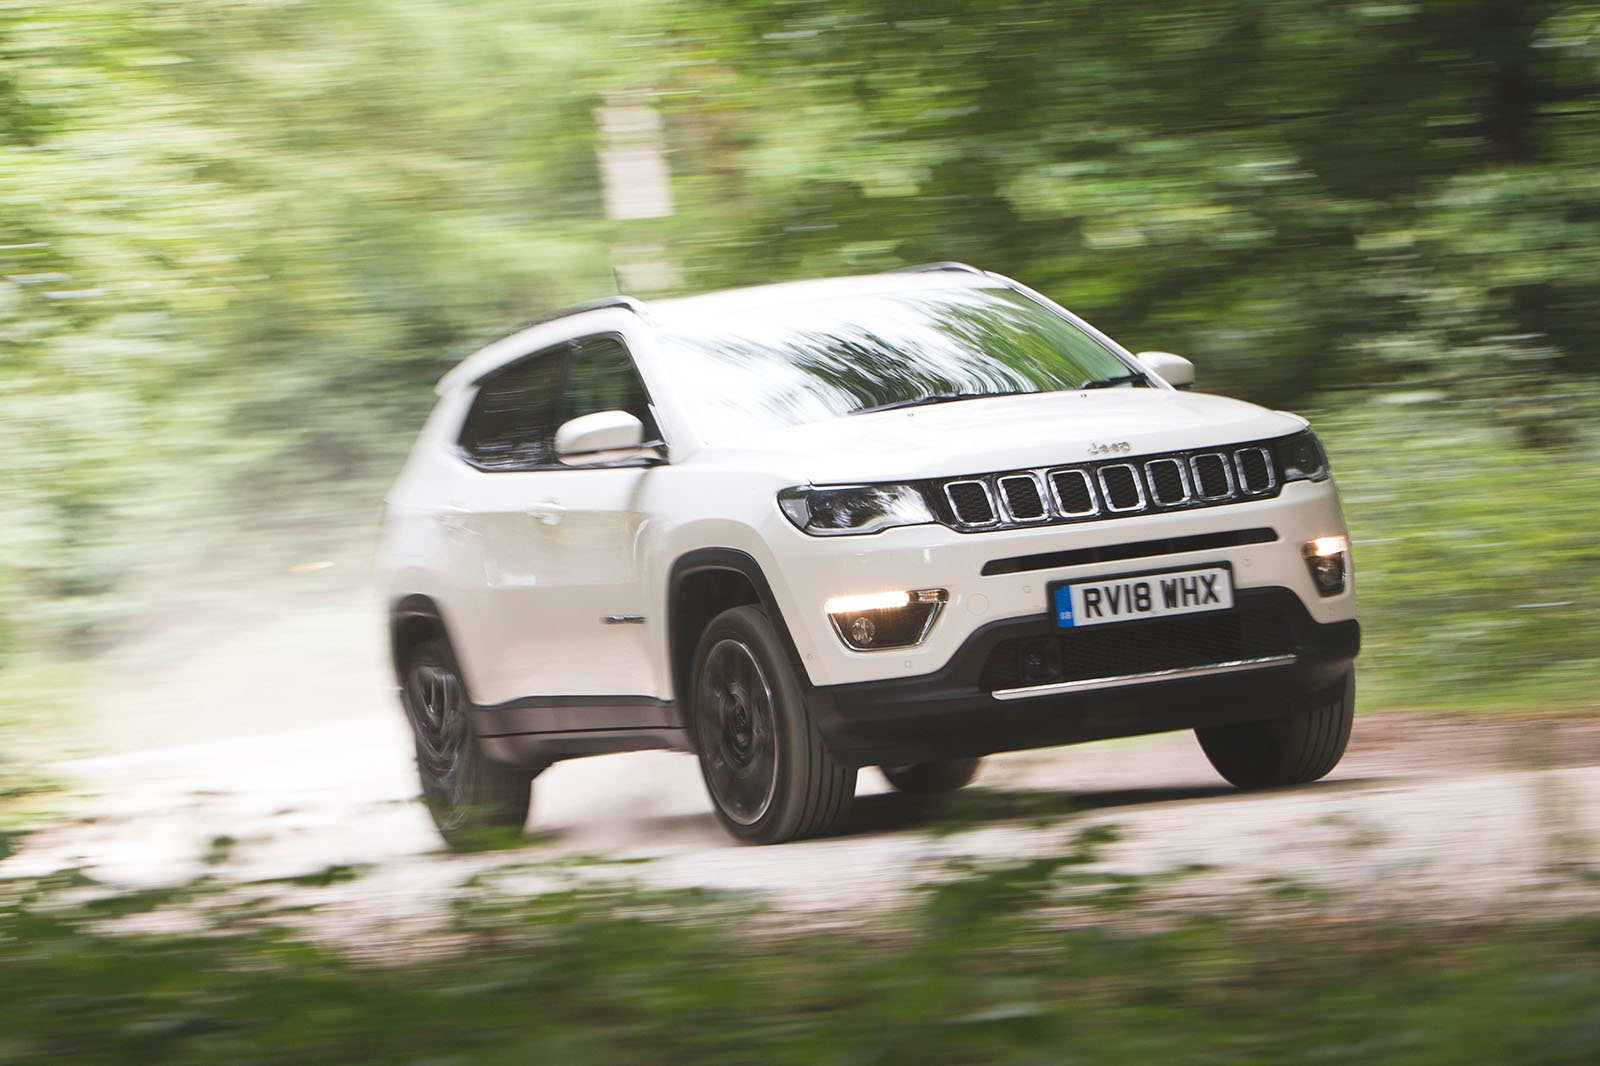 Jeep Compass 2018 road test review - cornering front